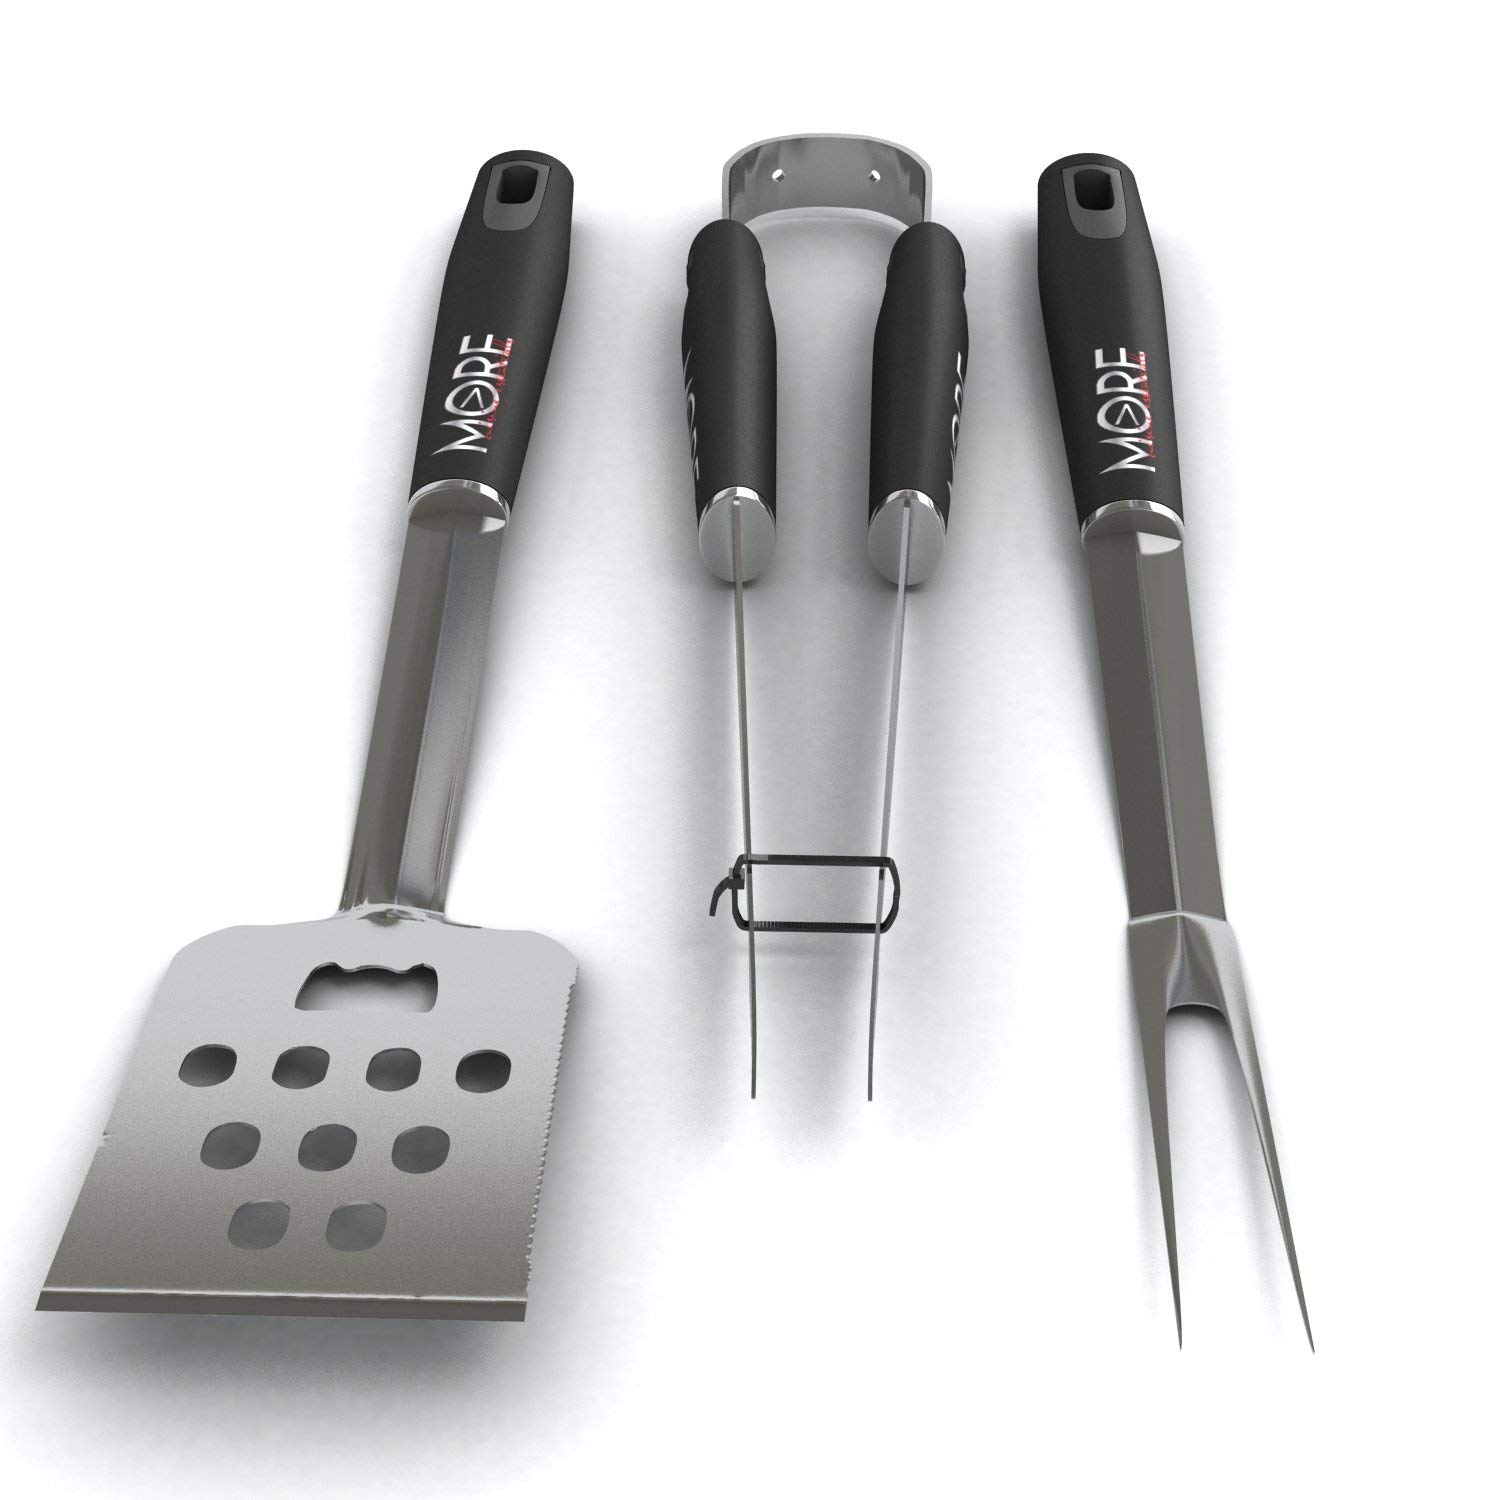 3-Piece BBQ Set - Heavy Duty Stainless Steel BBQ Tool Set - BBQ RECIPE eBook - Dozens of Amazing Grilling Recipes - BBQ Accessories for Grilling Like a BOSS. Great for Electric, Gas, & Outdoor Grills - image 3 of 7